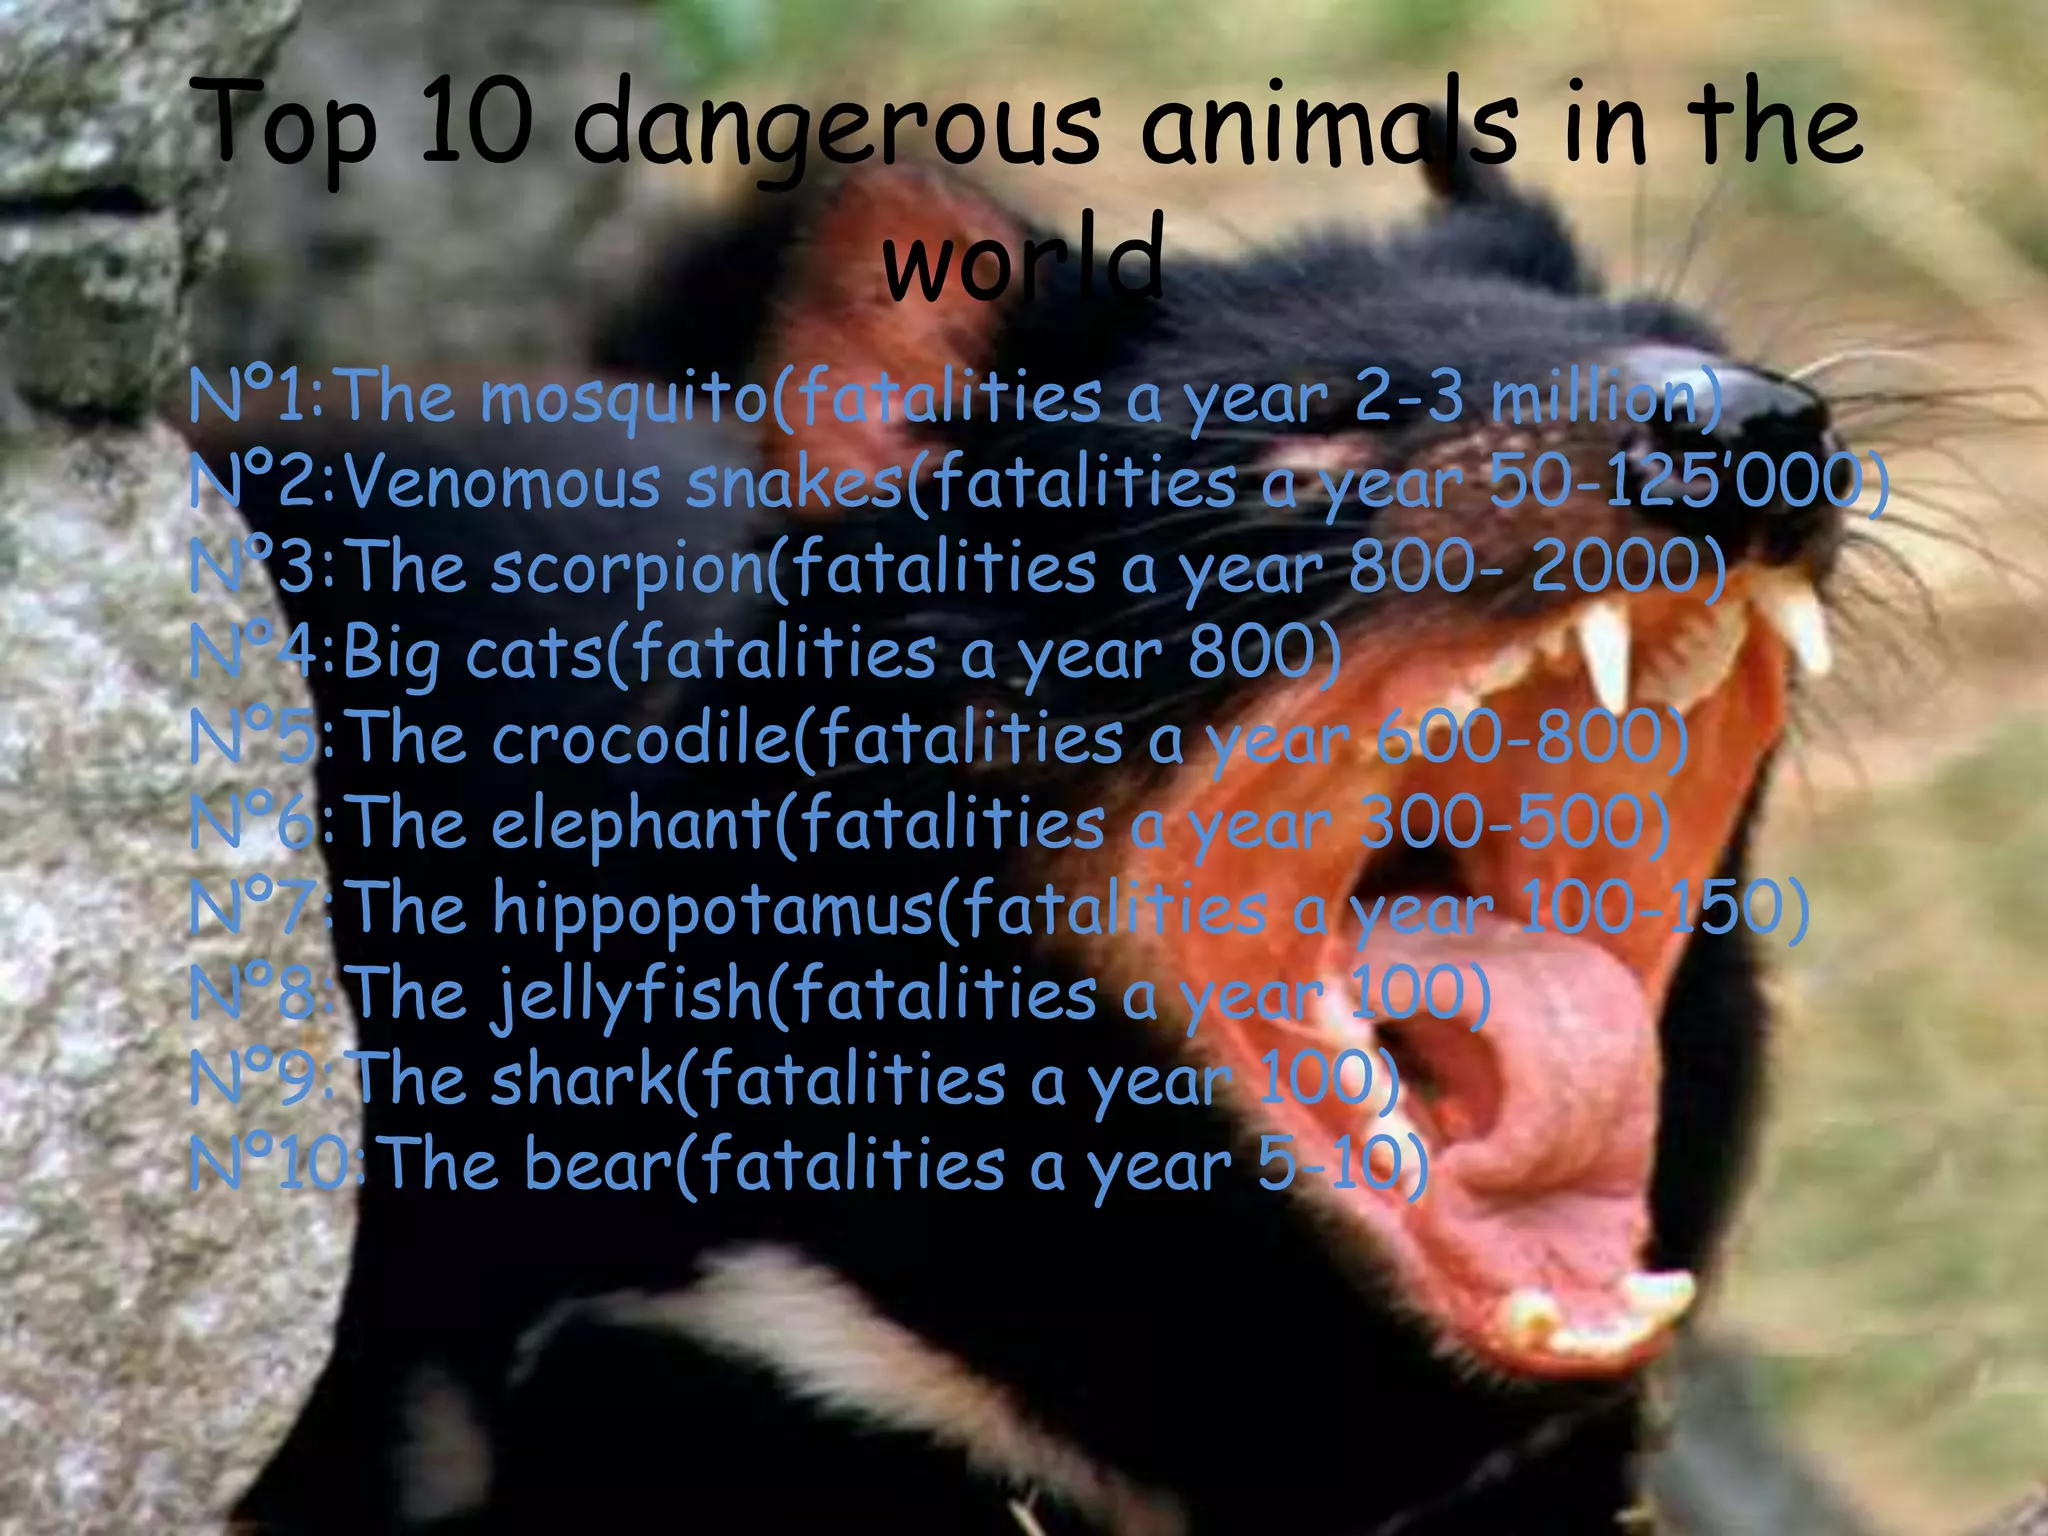 Dangerous animals in the world